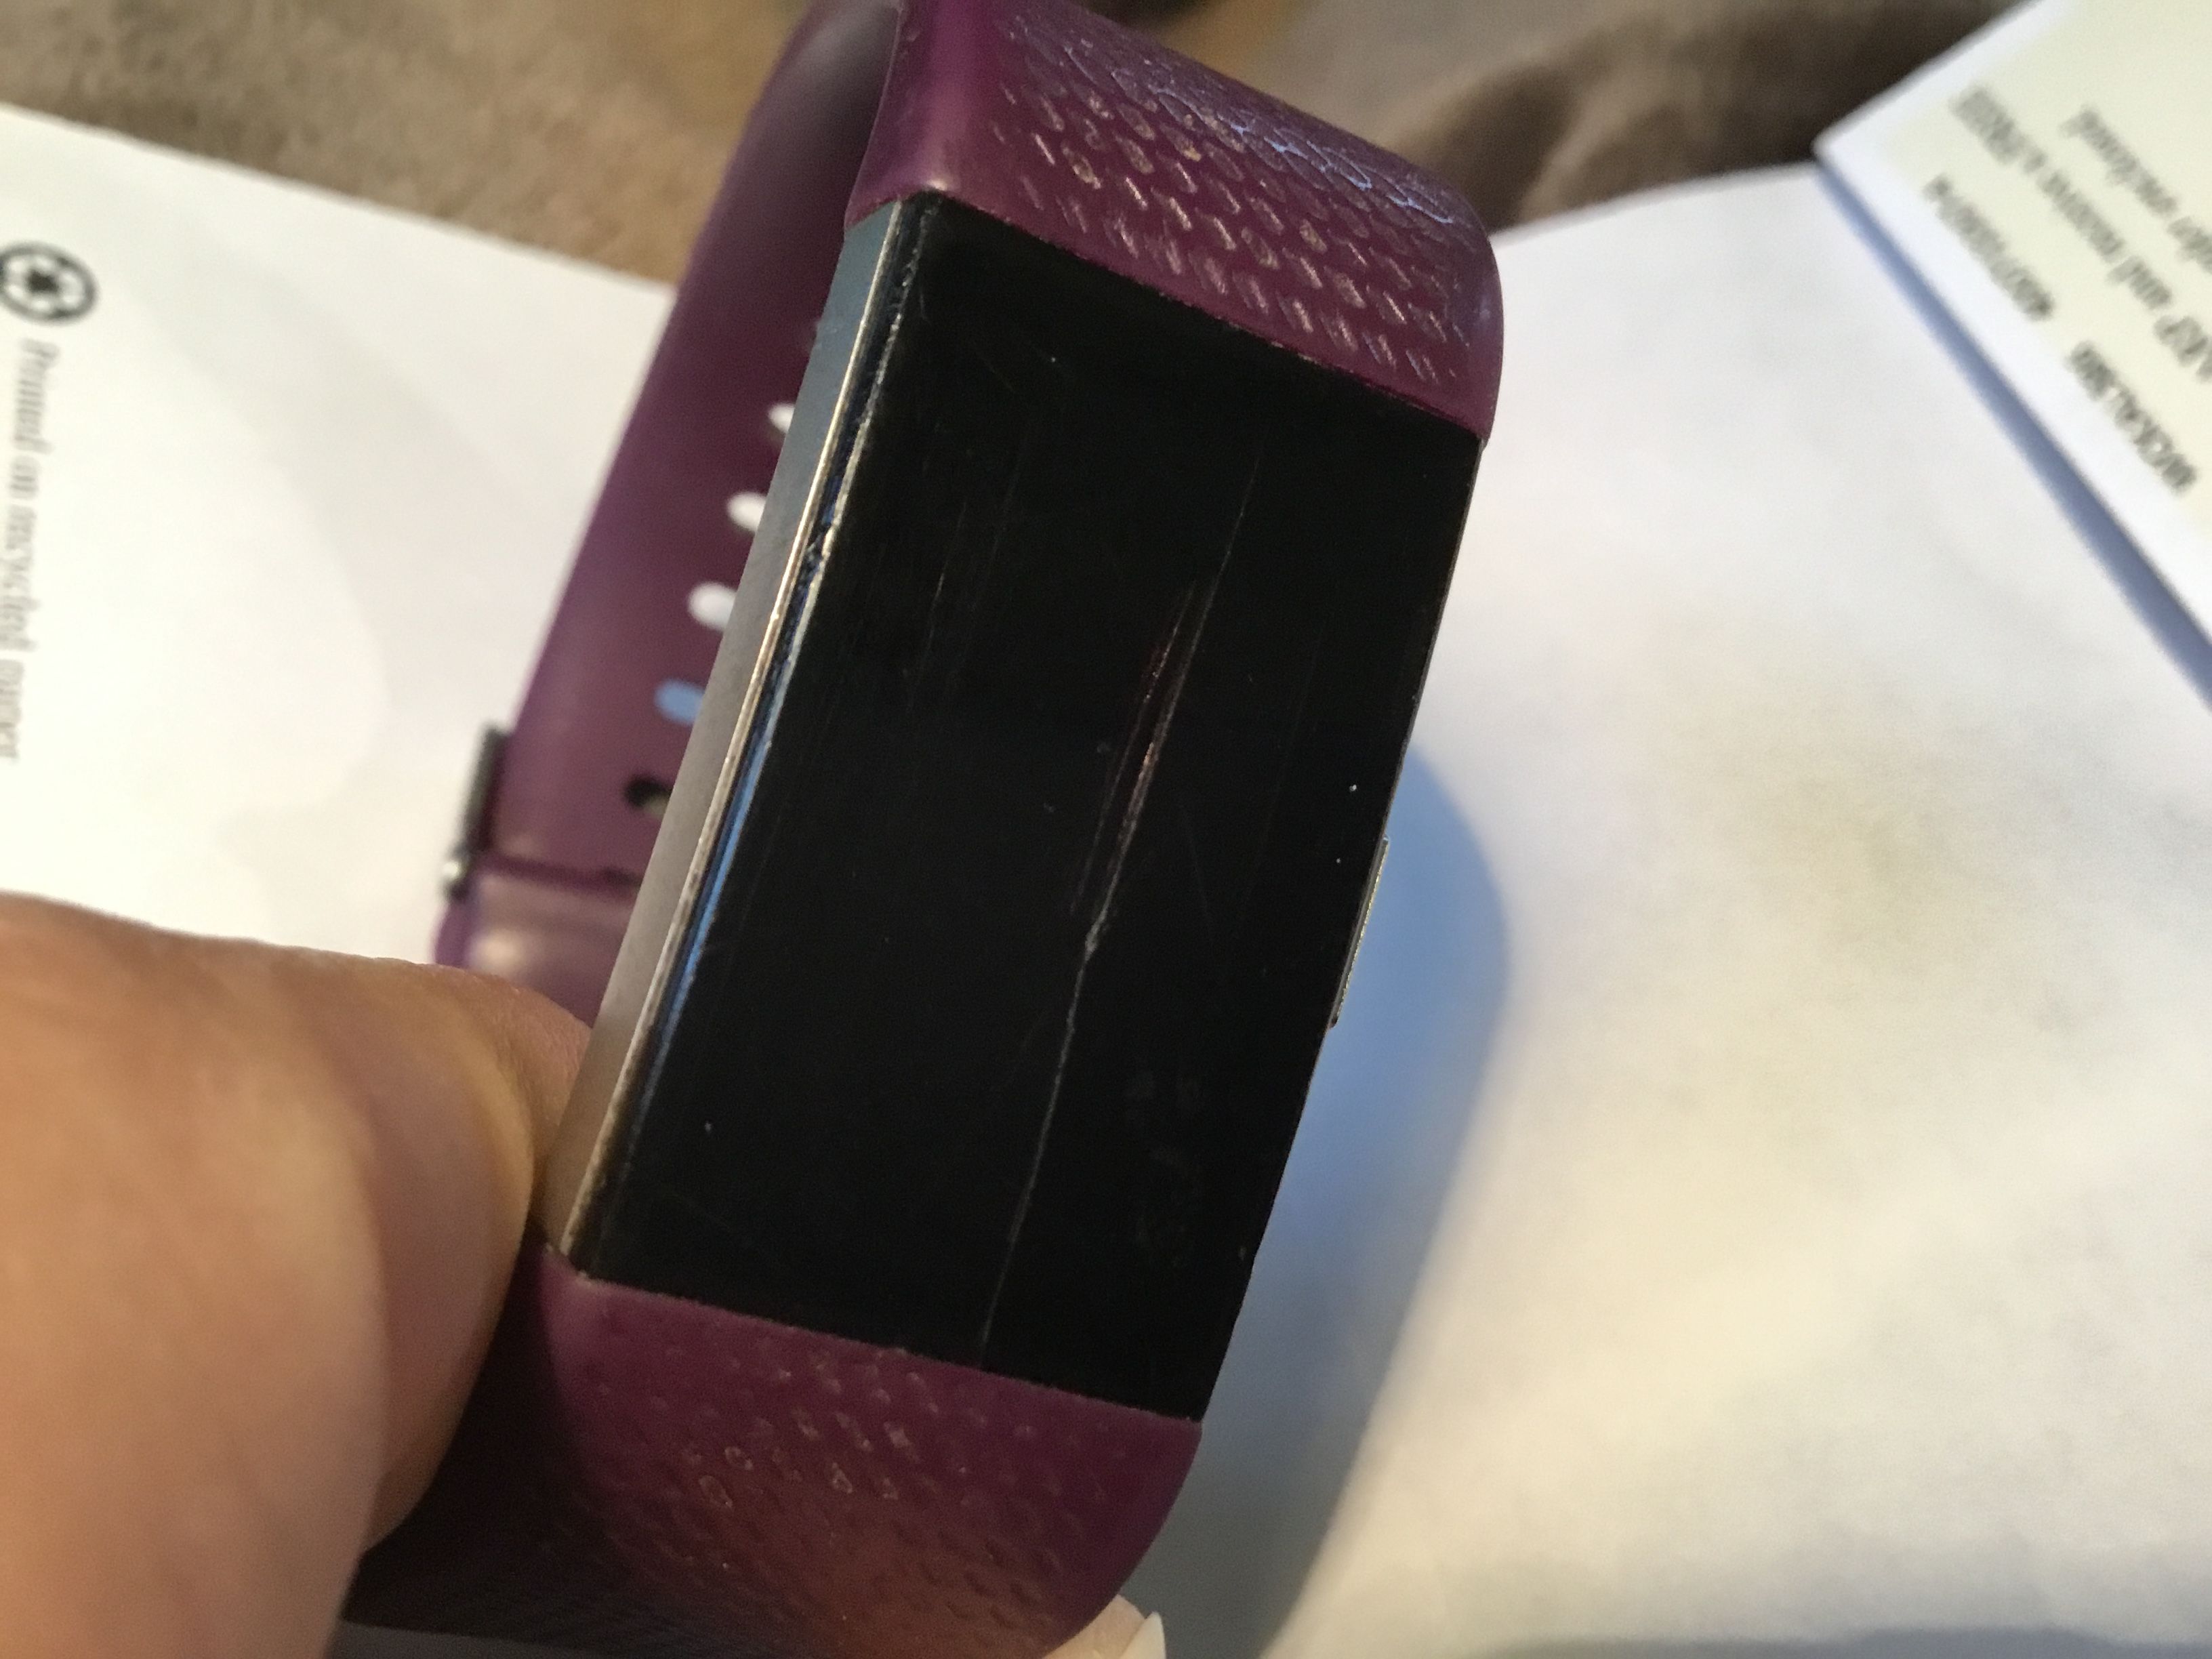 replacement glass for fitbit charge 2